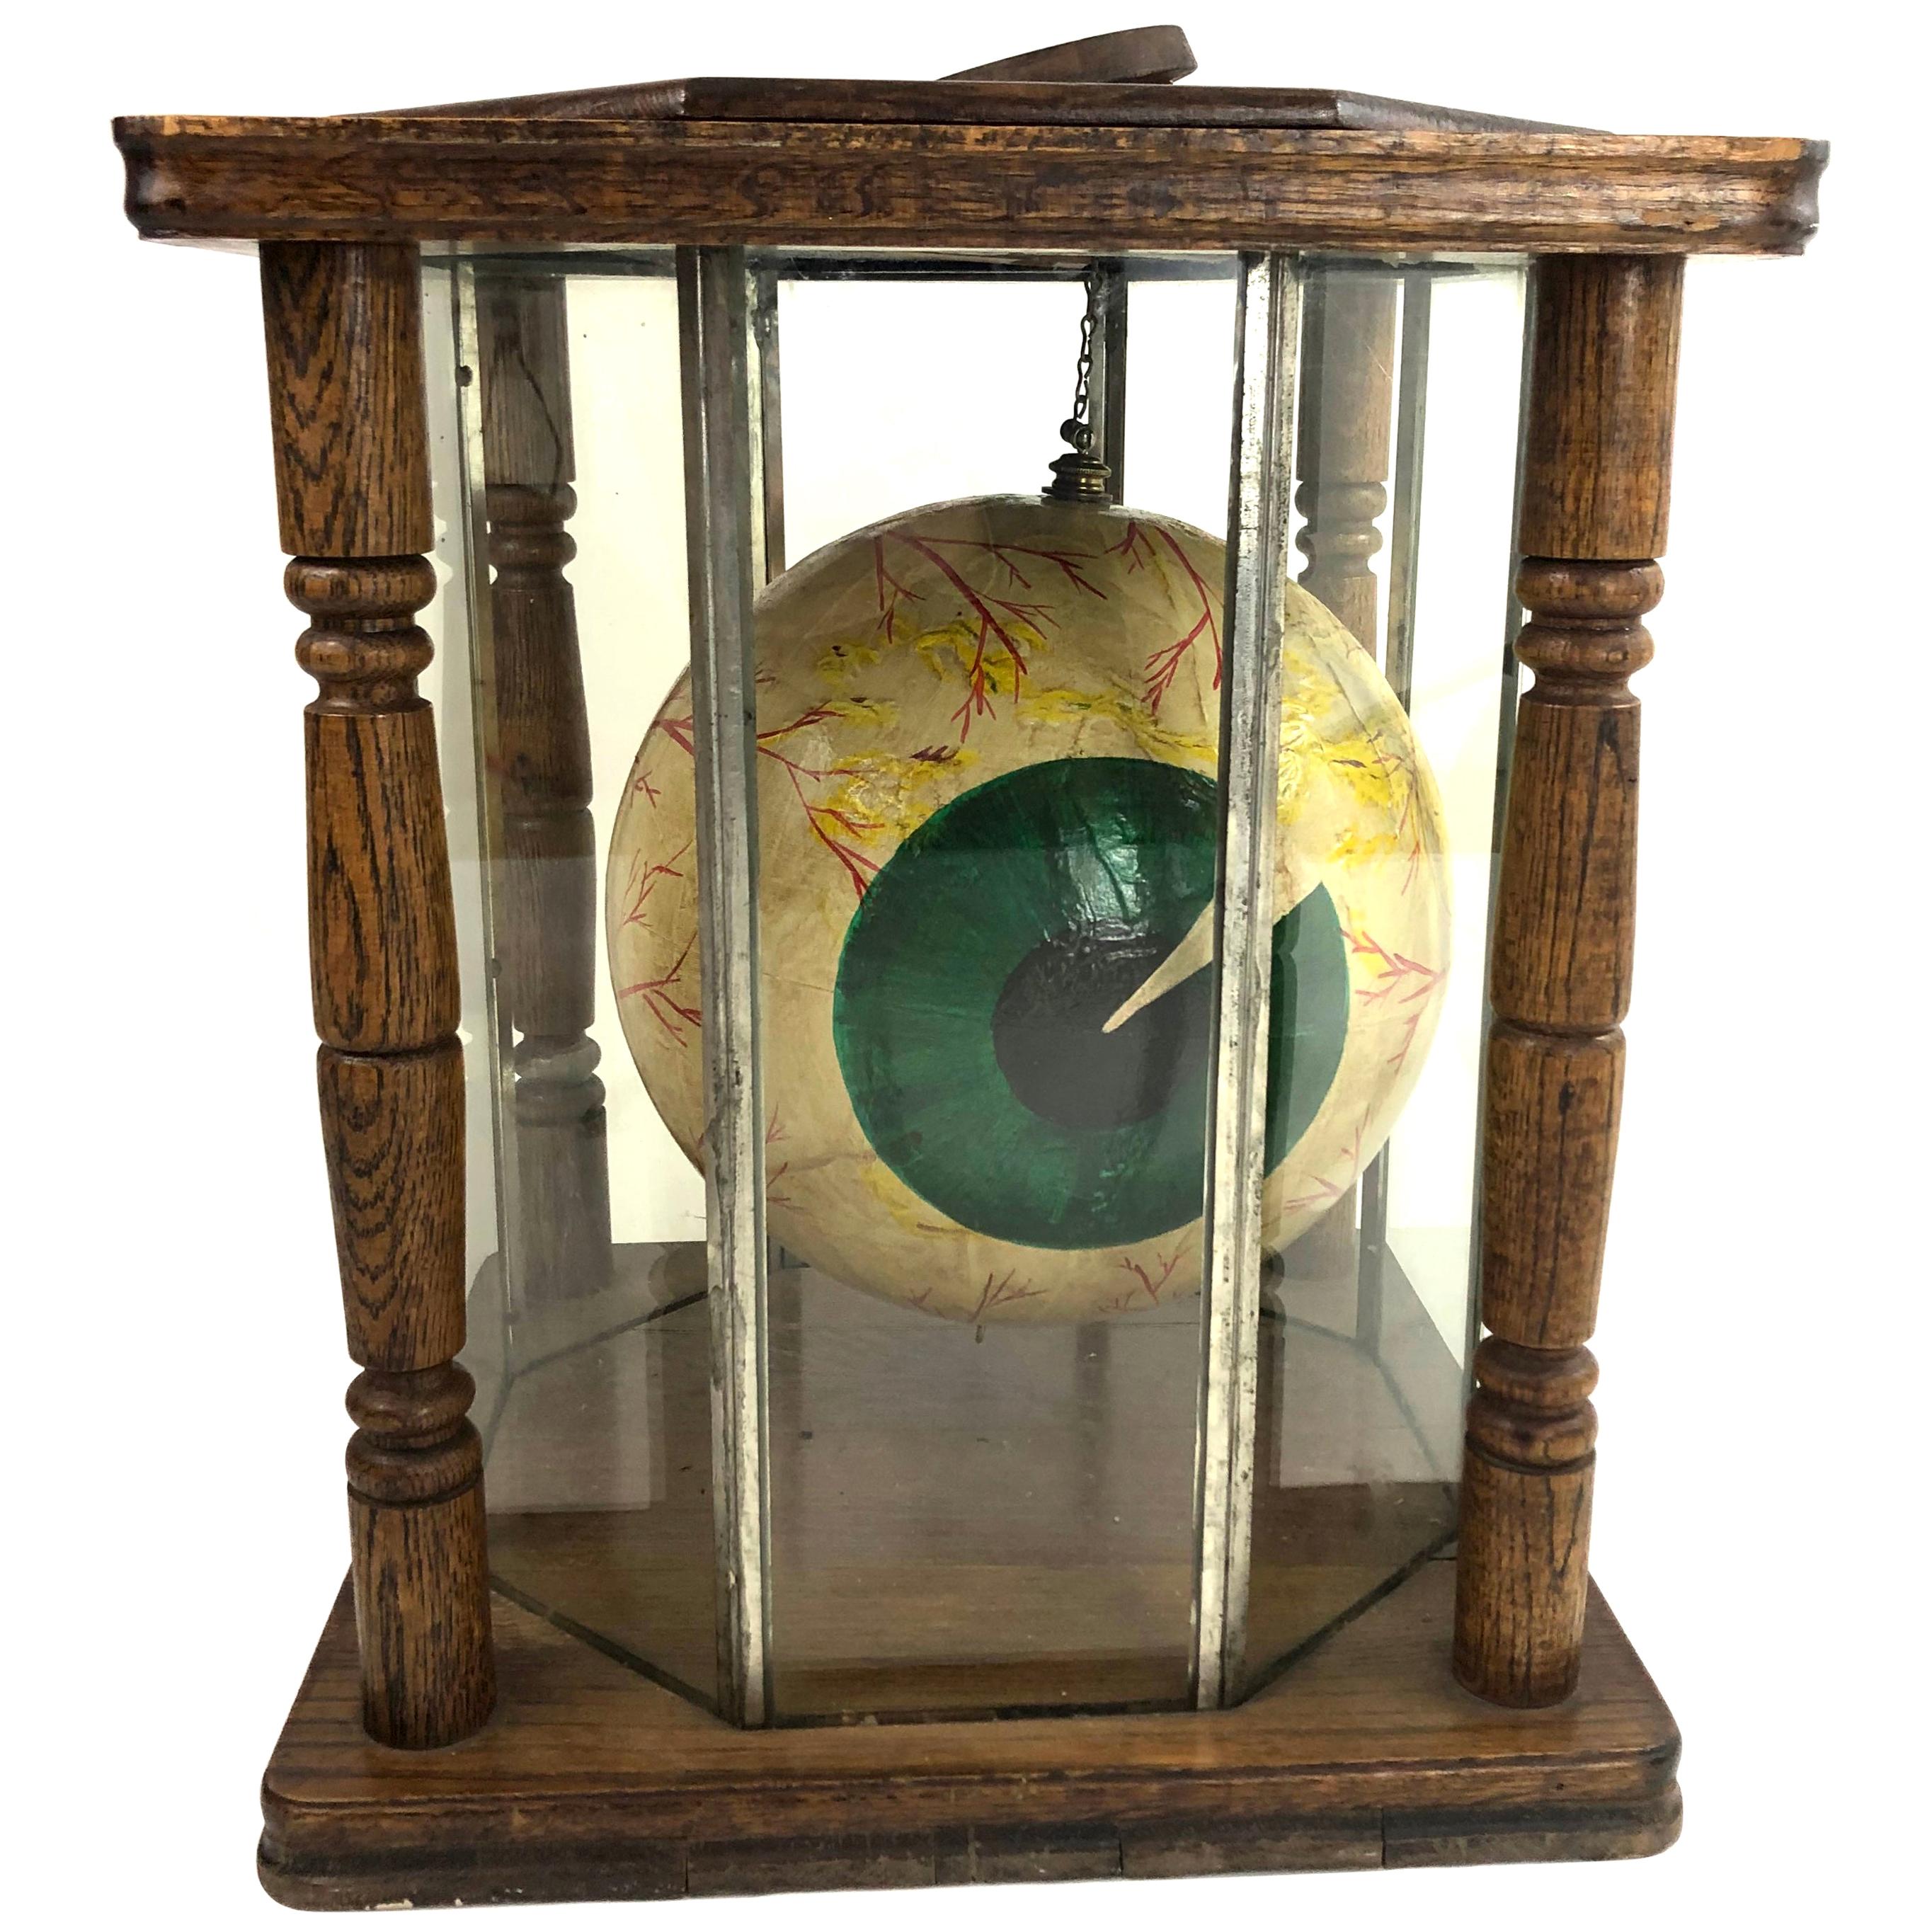 Giant Antique Ophthalmologist's Model of an Eye in Its Original Case